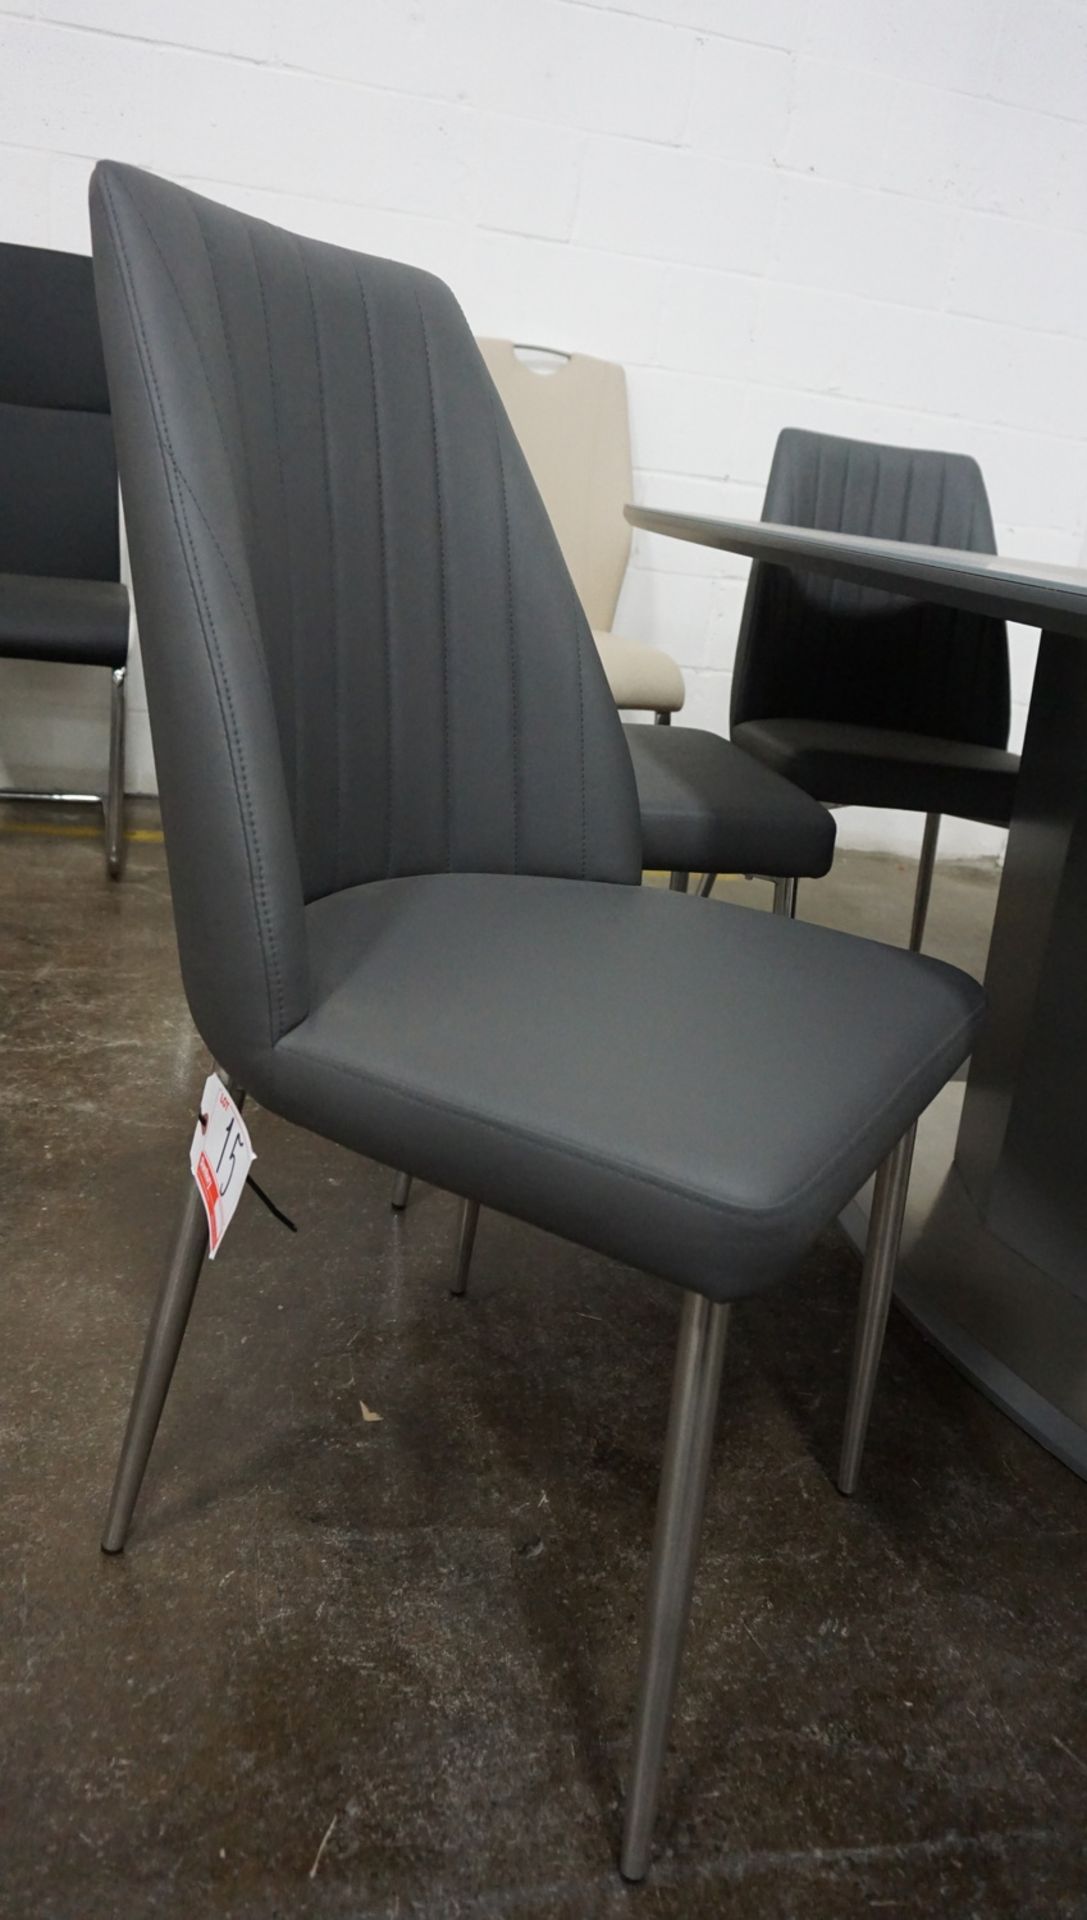 UNITS - GREY PU LEATHER W/ CHROME LEGS DINING CHAIRS